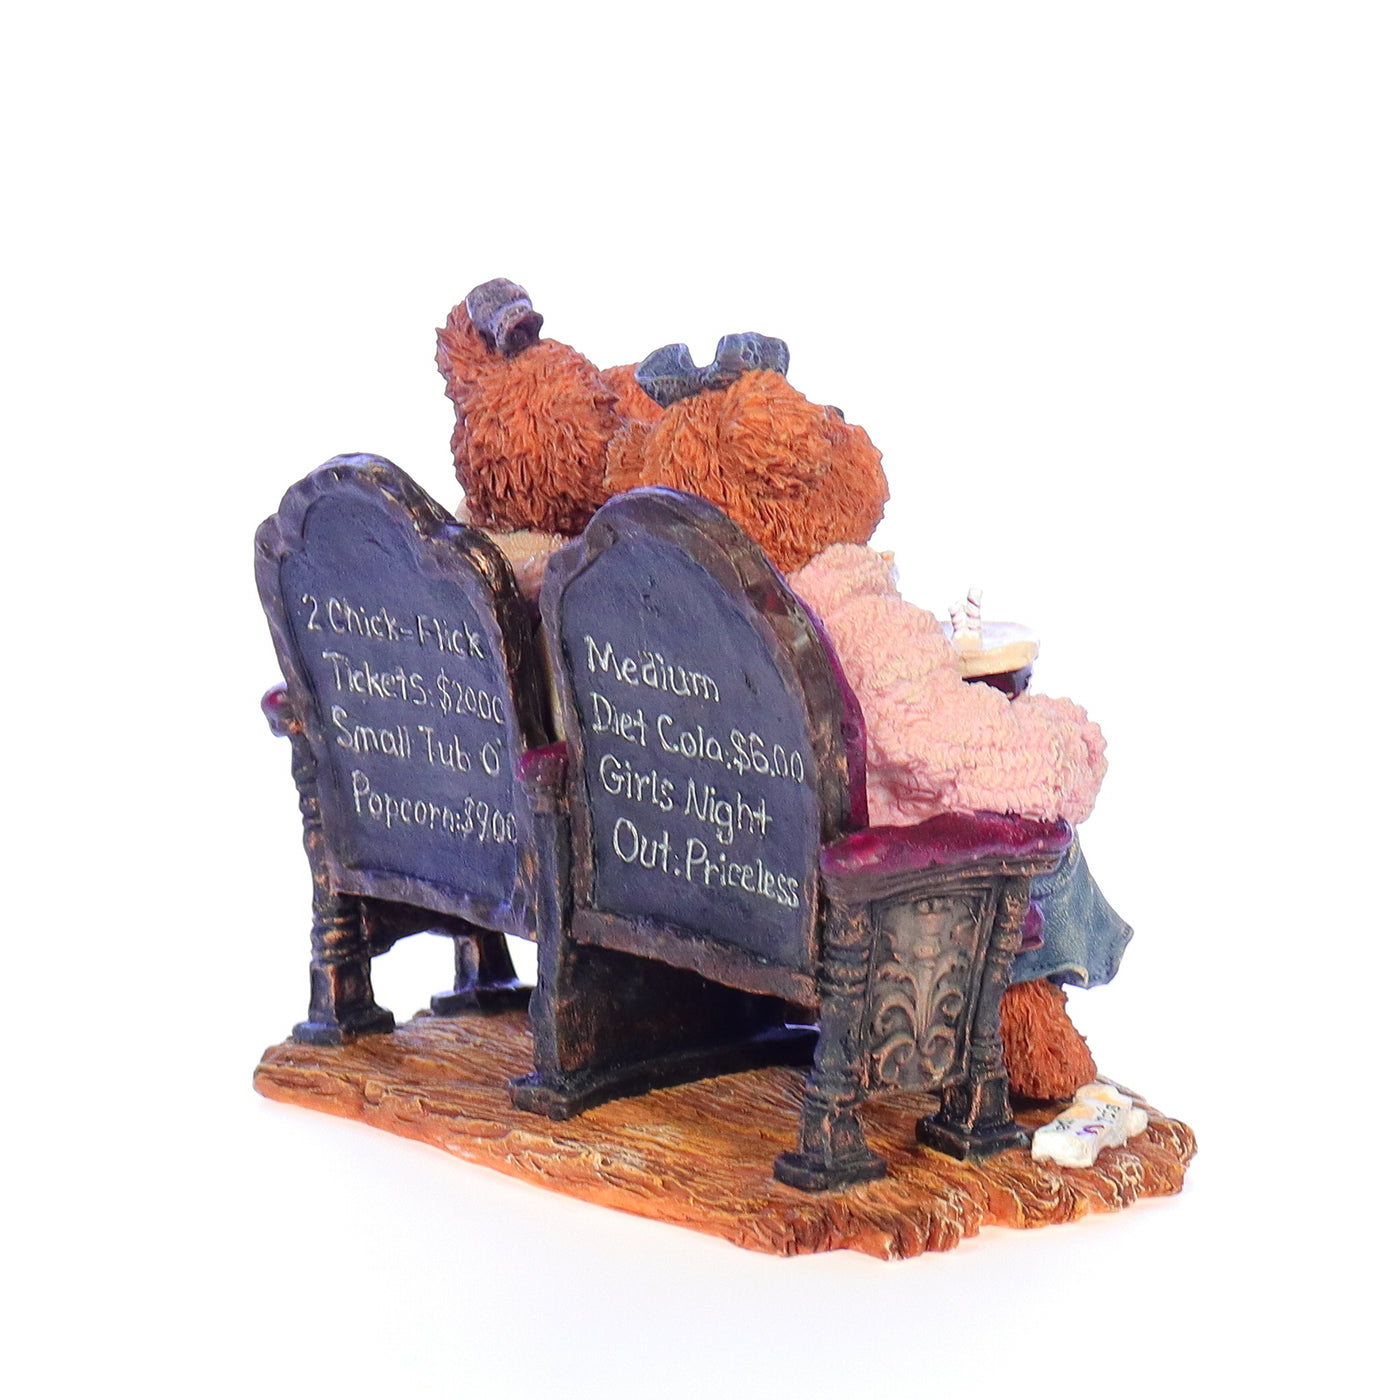 the bearstone collection 227795 rachael and phoebe  girls night out friendship figurine 2002 back right